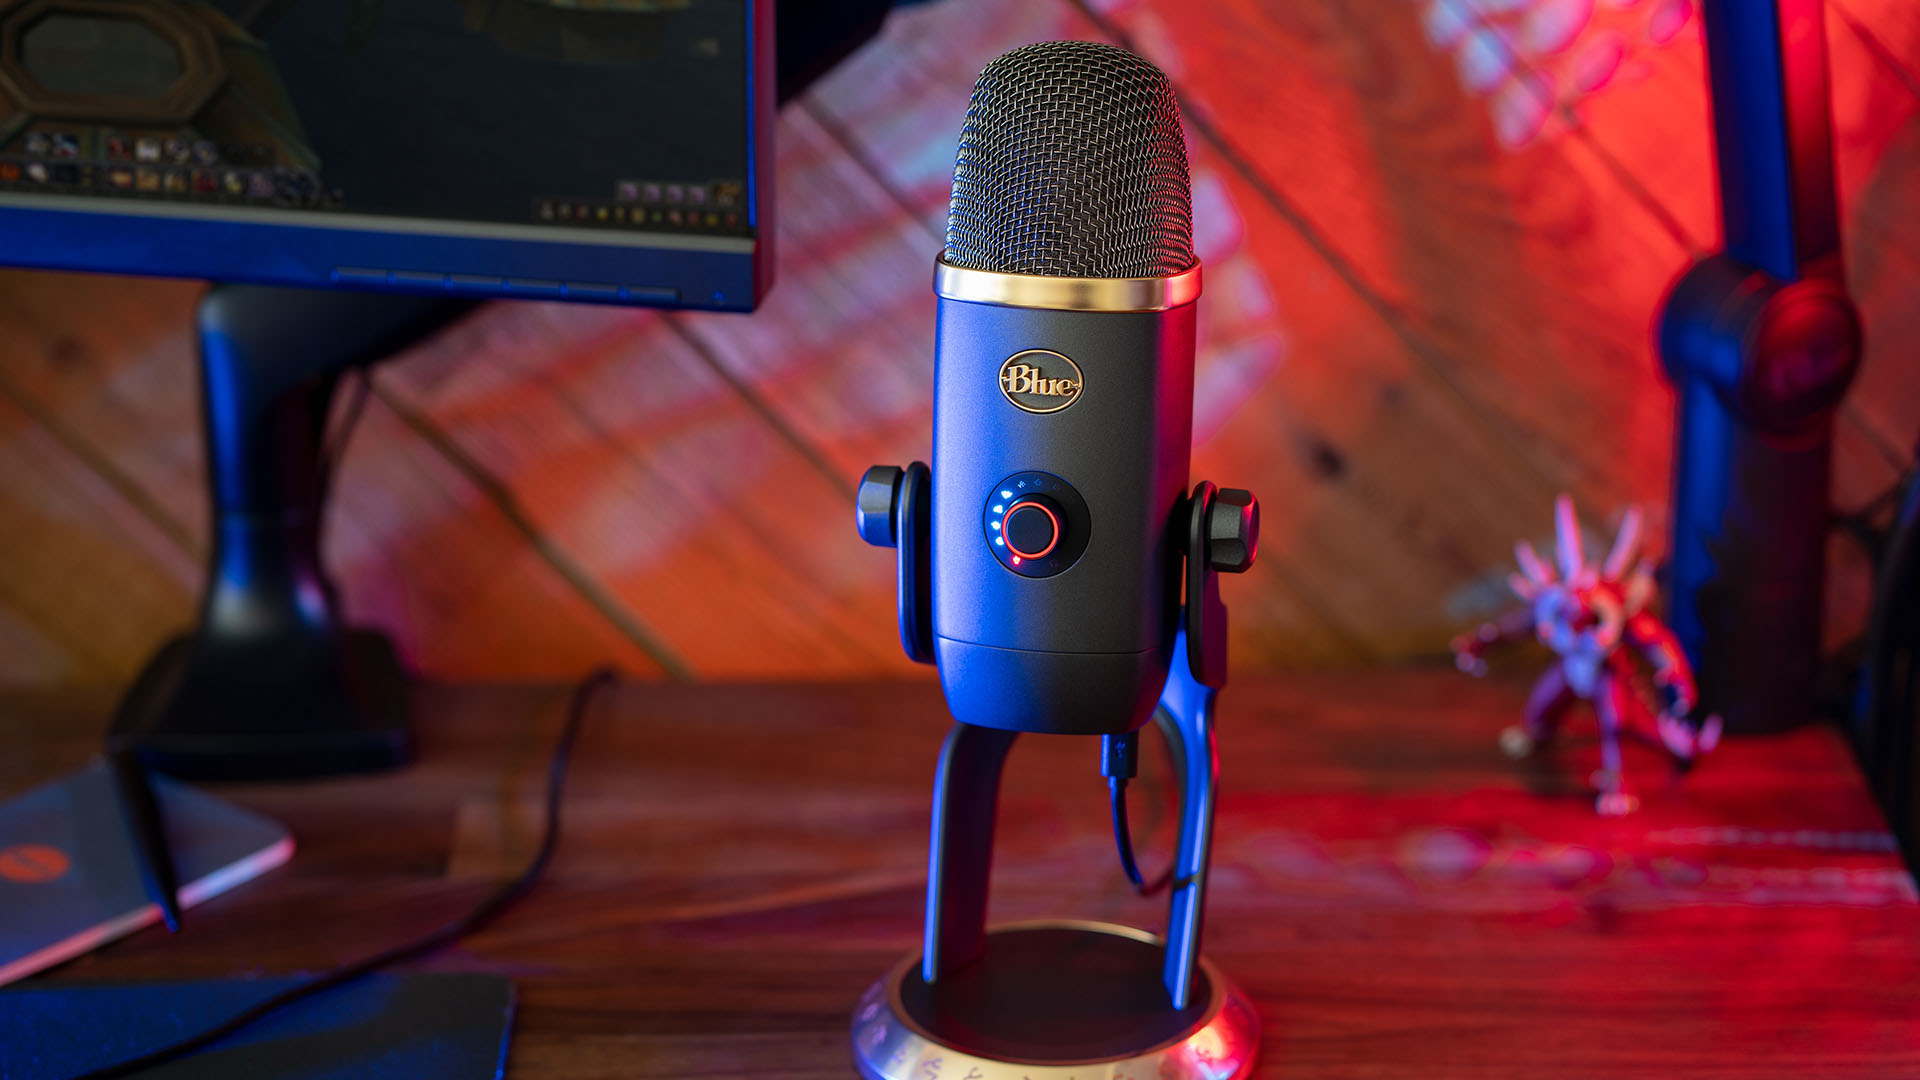 Best microphone for streaming: A blue microphone sits on a desk next to a monitor